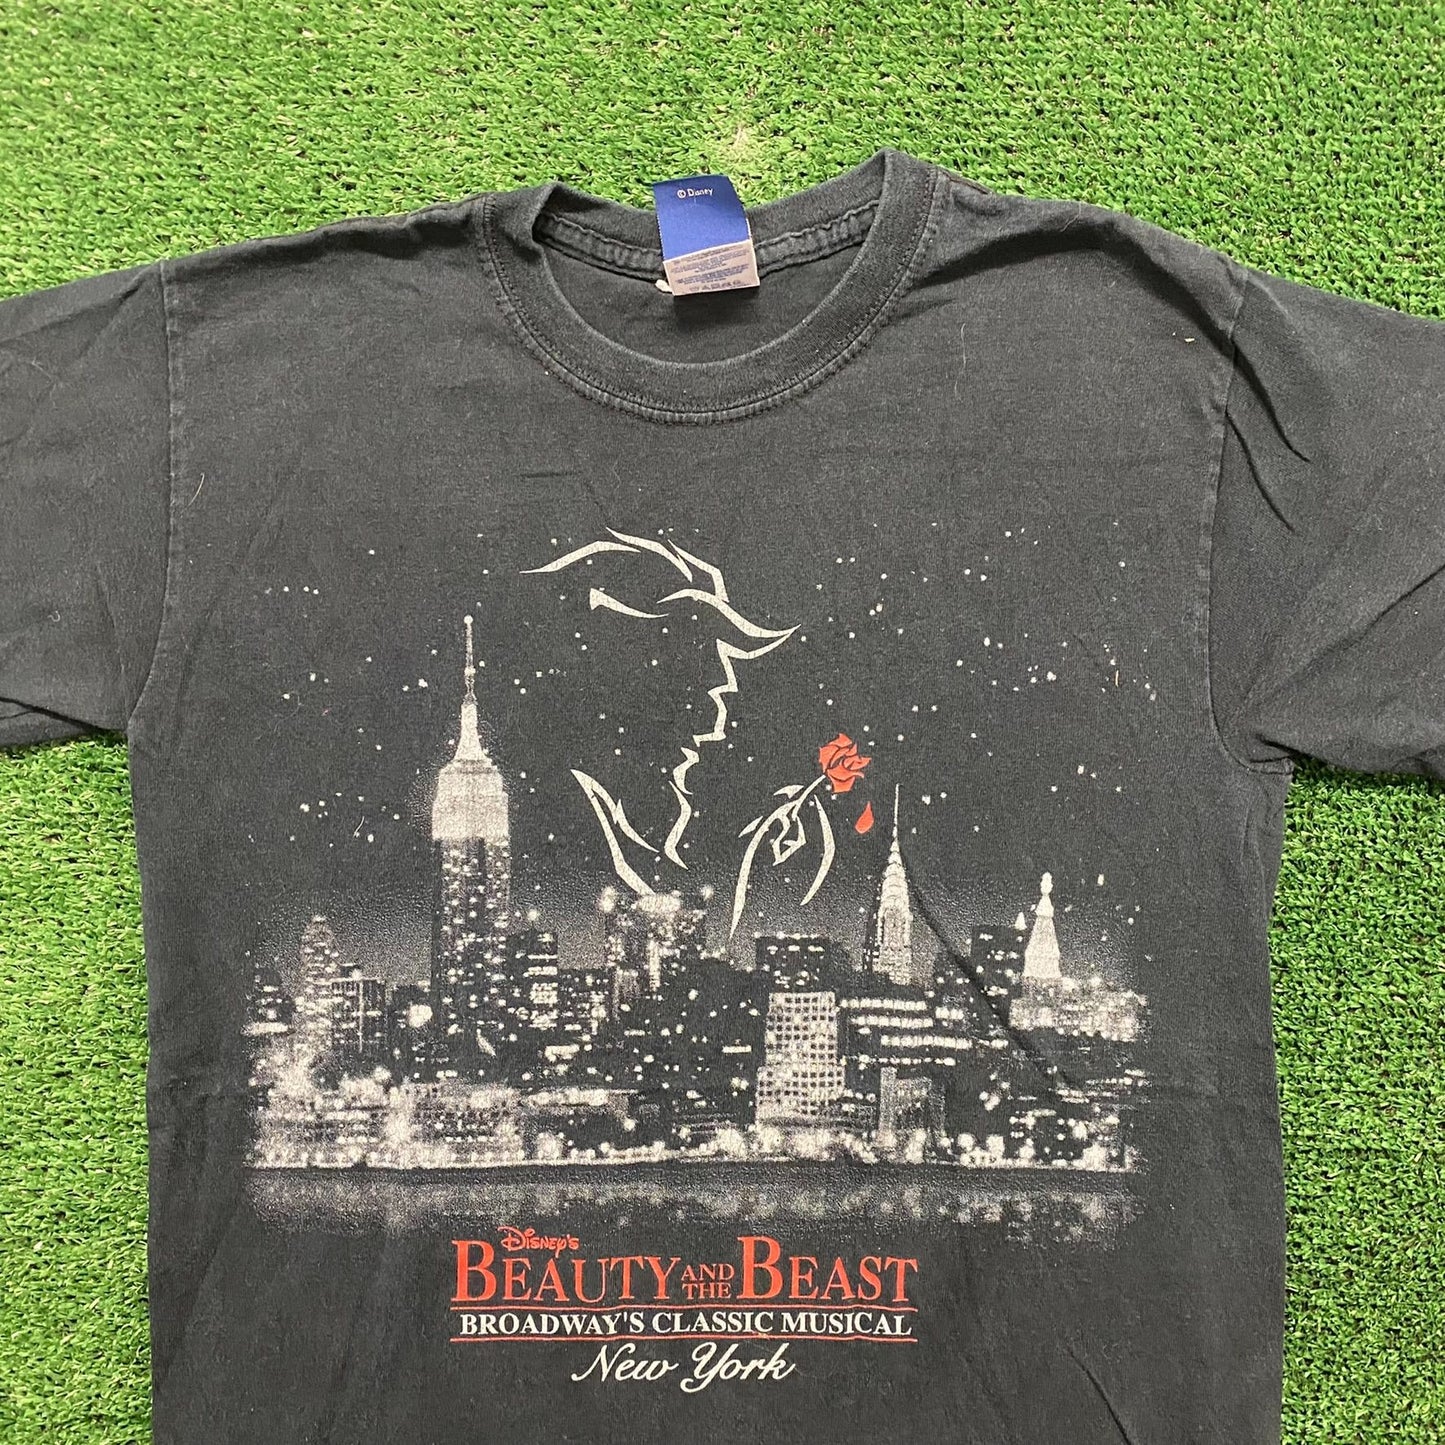 Vintage 90s Essential Beauty and the Beast Disney Movie T-Shirt